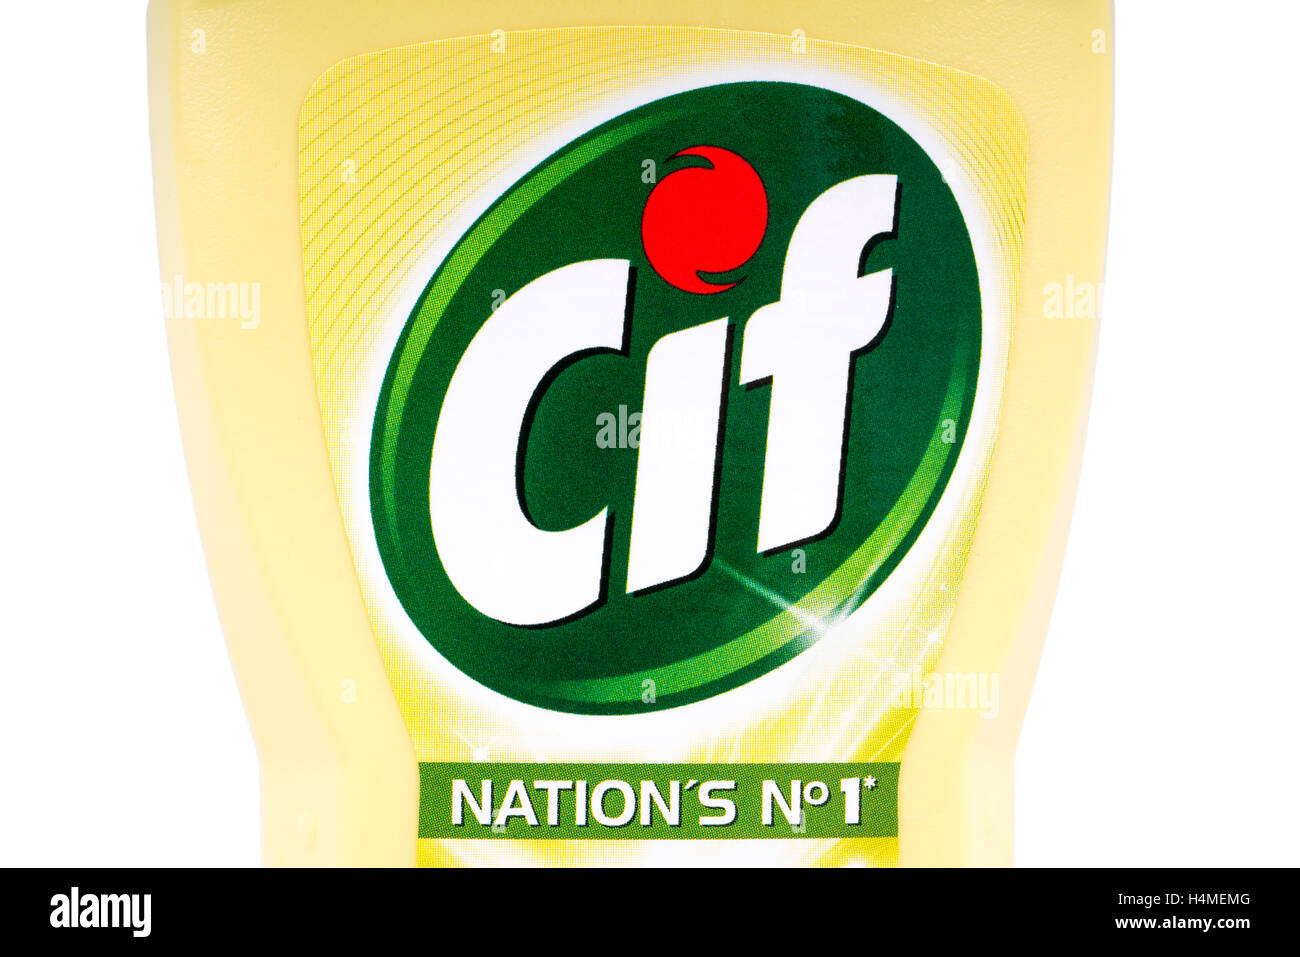 LONDON, UK - OCTOBER 13TH 2016: A close-up of the Cif logo on one of the brand’s household cleaning products. Stock Photo